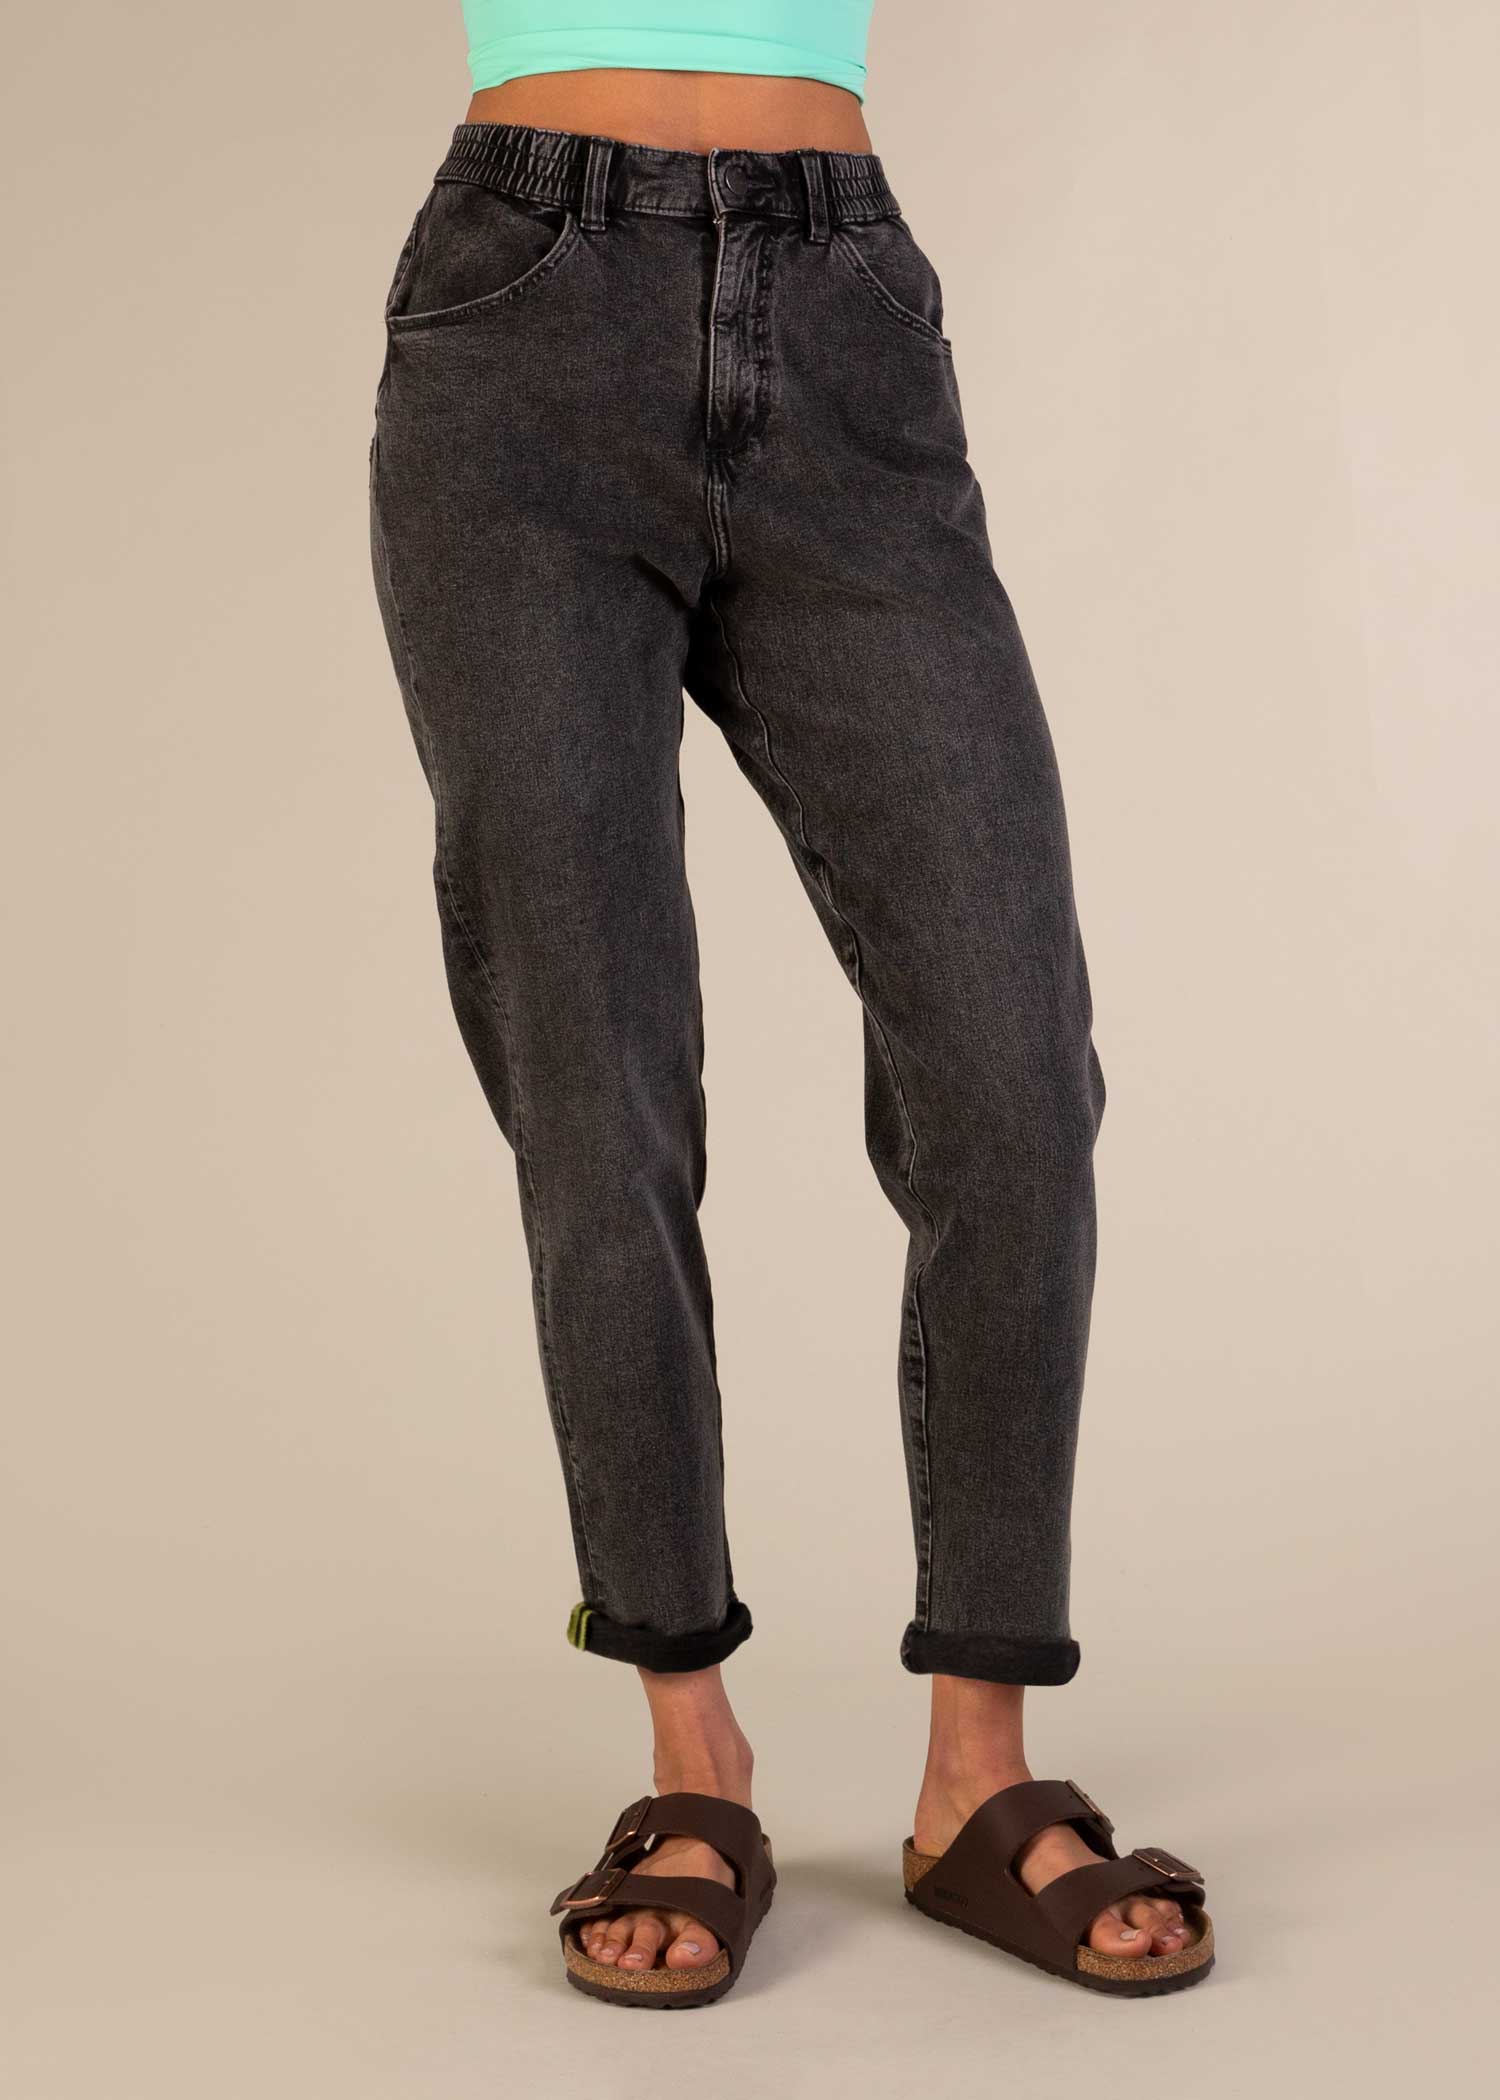 3RD ROCK Sustainable Unisex Denim Jeans - Natasha is 5ft 9" with a 25" waist, and is wearing a 28 RL. F